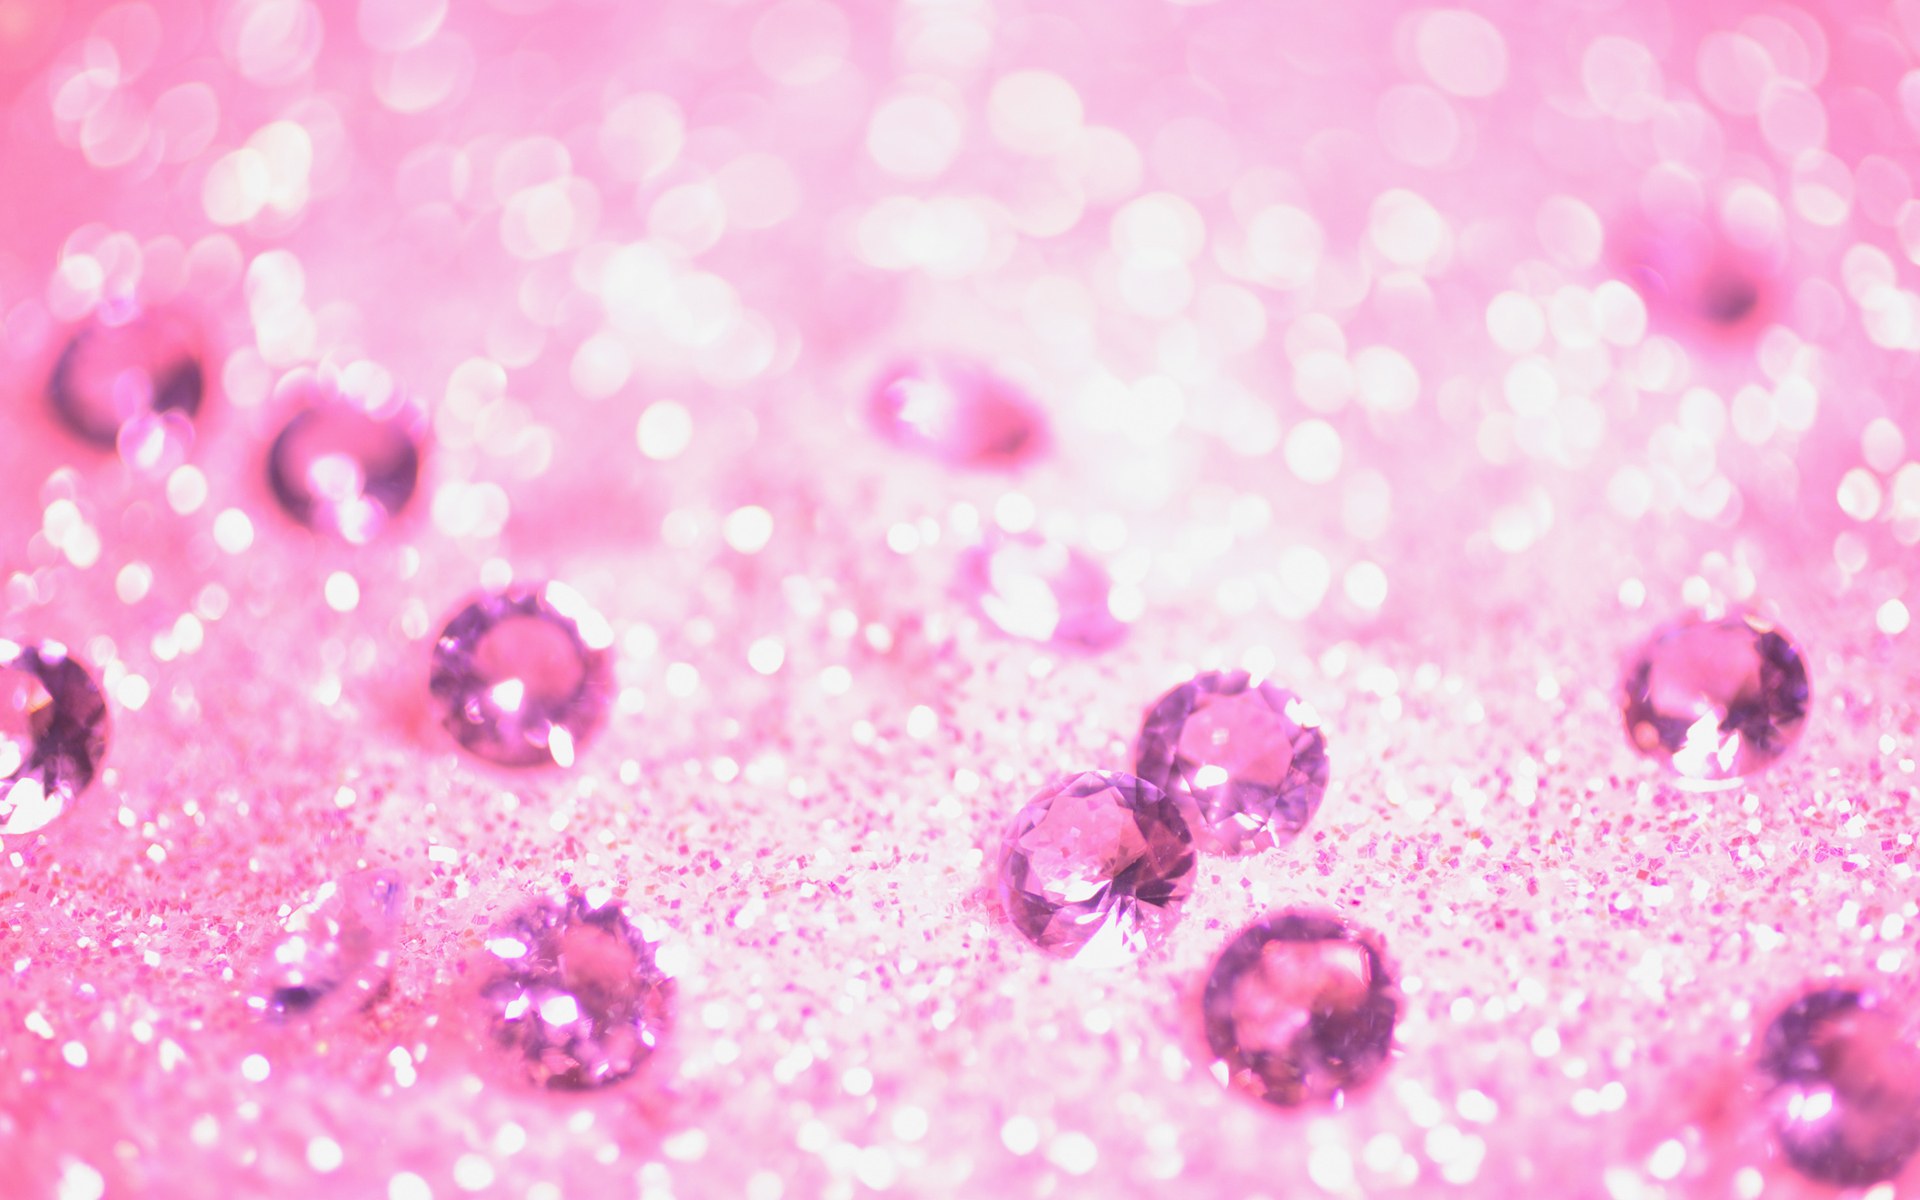 Sparkling and Romantic Backgrounds HK061 350A Wallpapers - HD ...